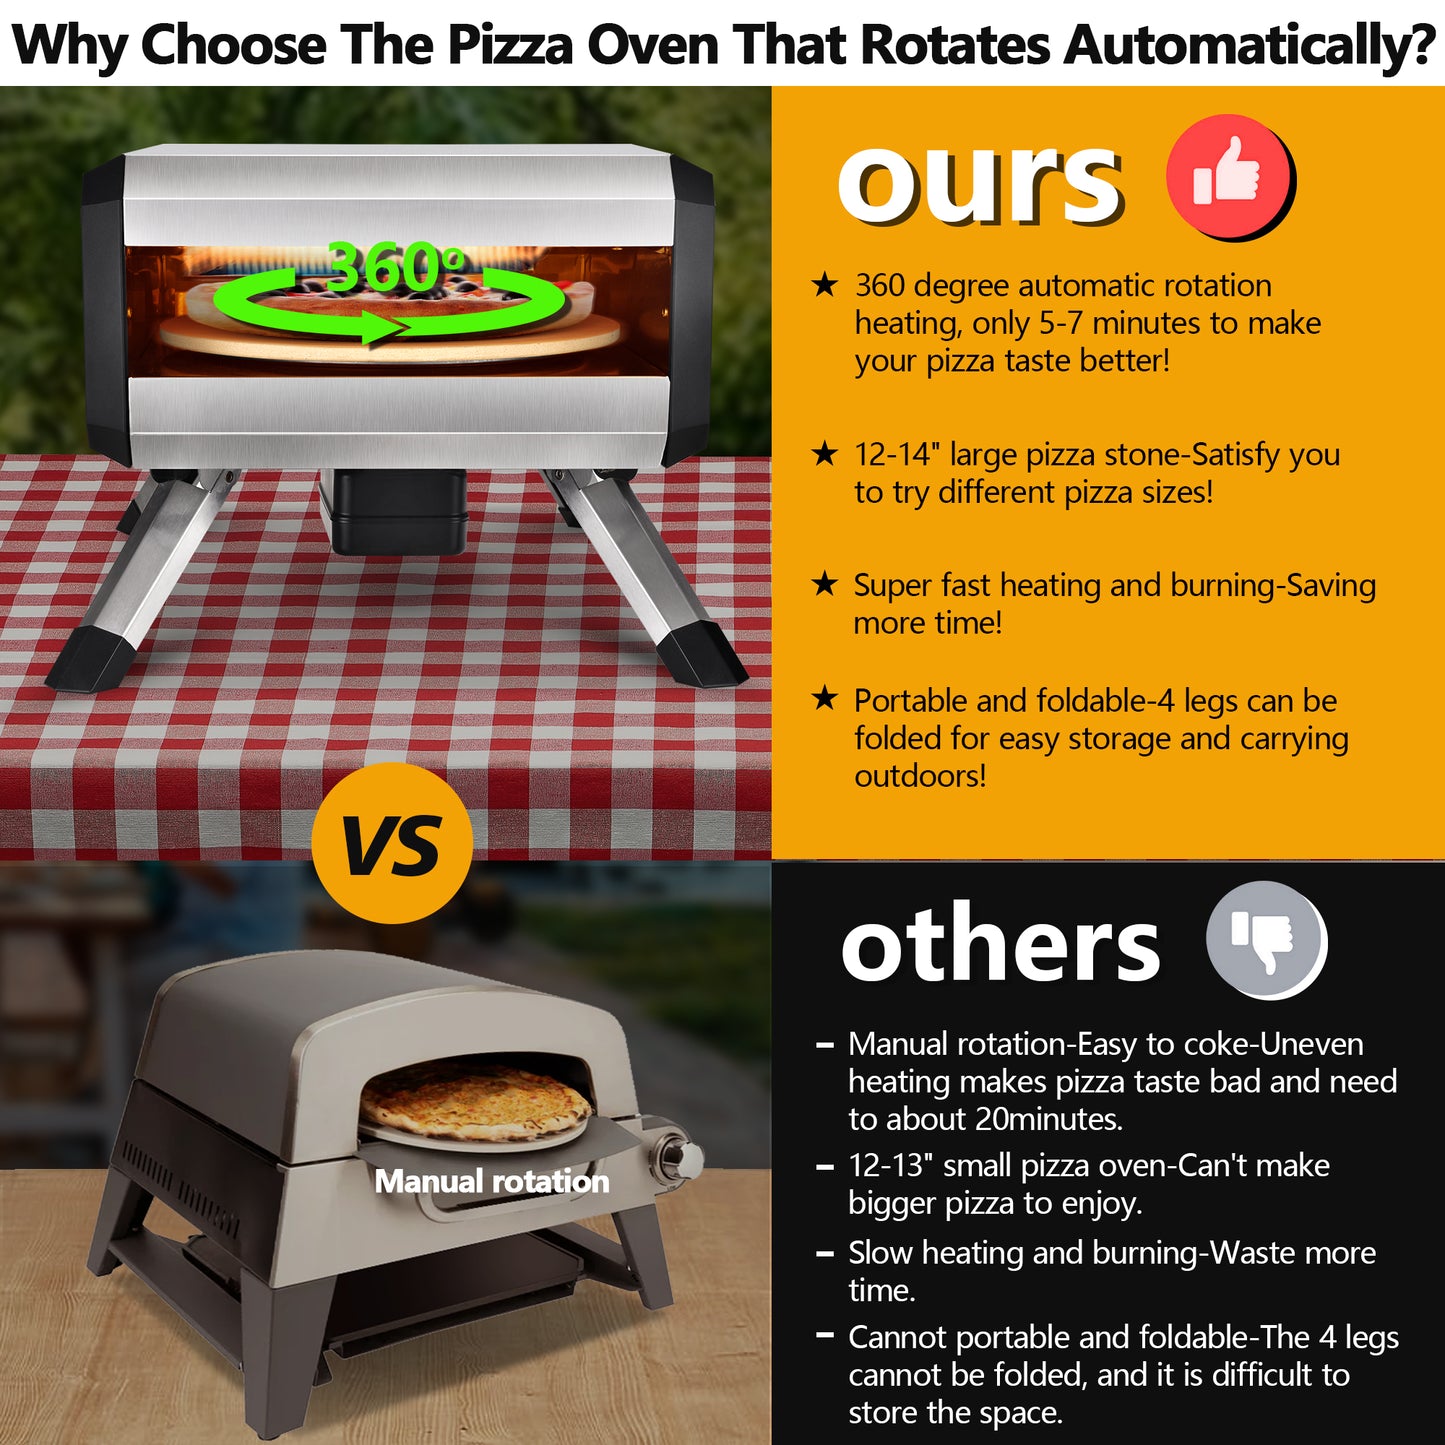 Other Things You Can Make in Your Pizza Oven